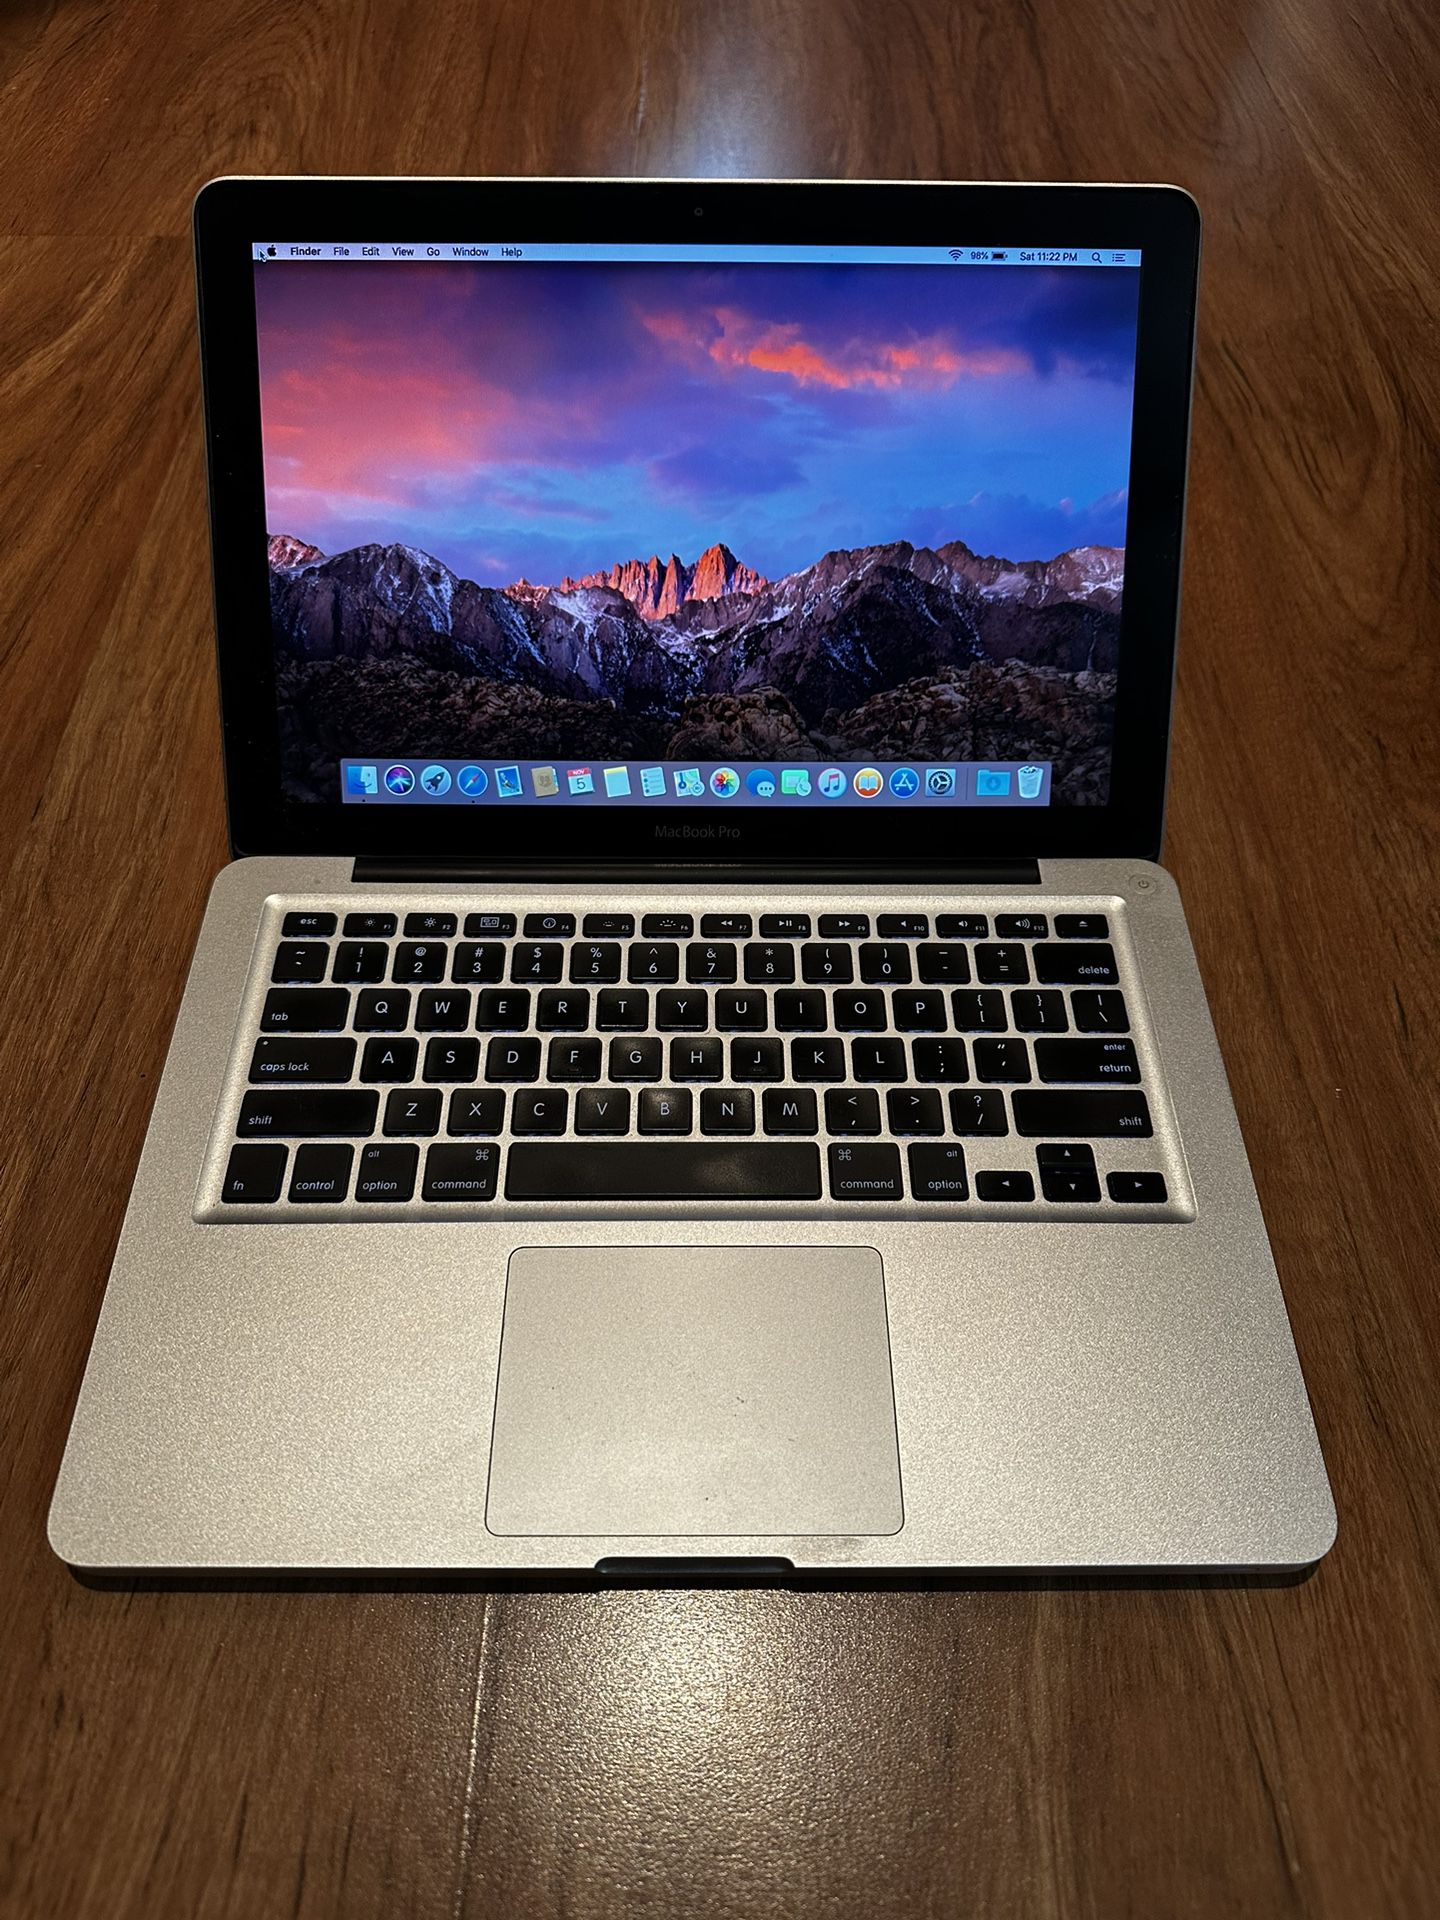 Apple MacBook Pro core i7 (13-inch Early 2011) mac OS High Sierra Version 10.13.6 16GB  Ram 256GB SSD Hard Drive  with charger in Excellent Working co